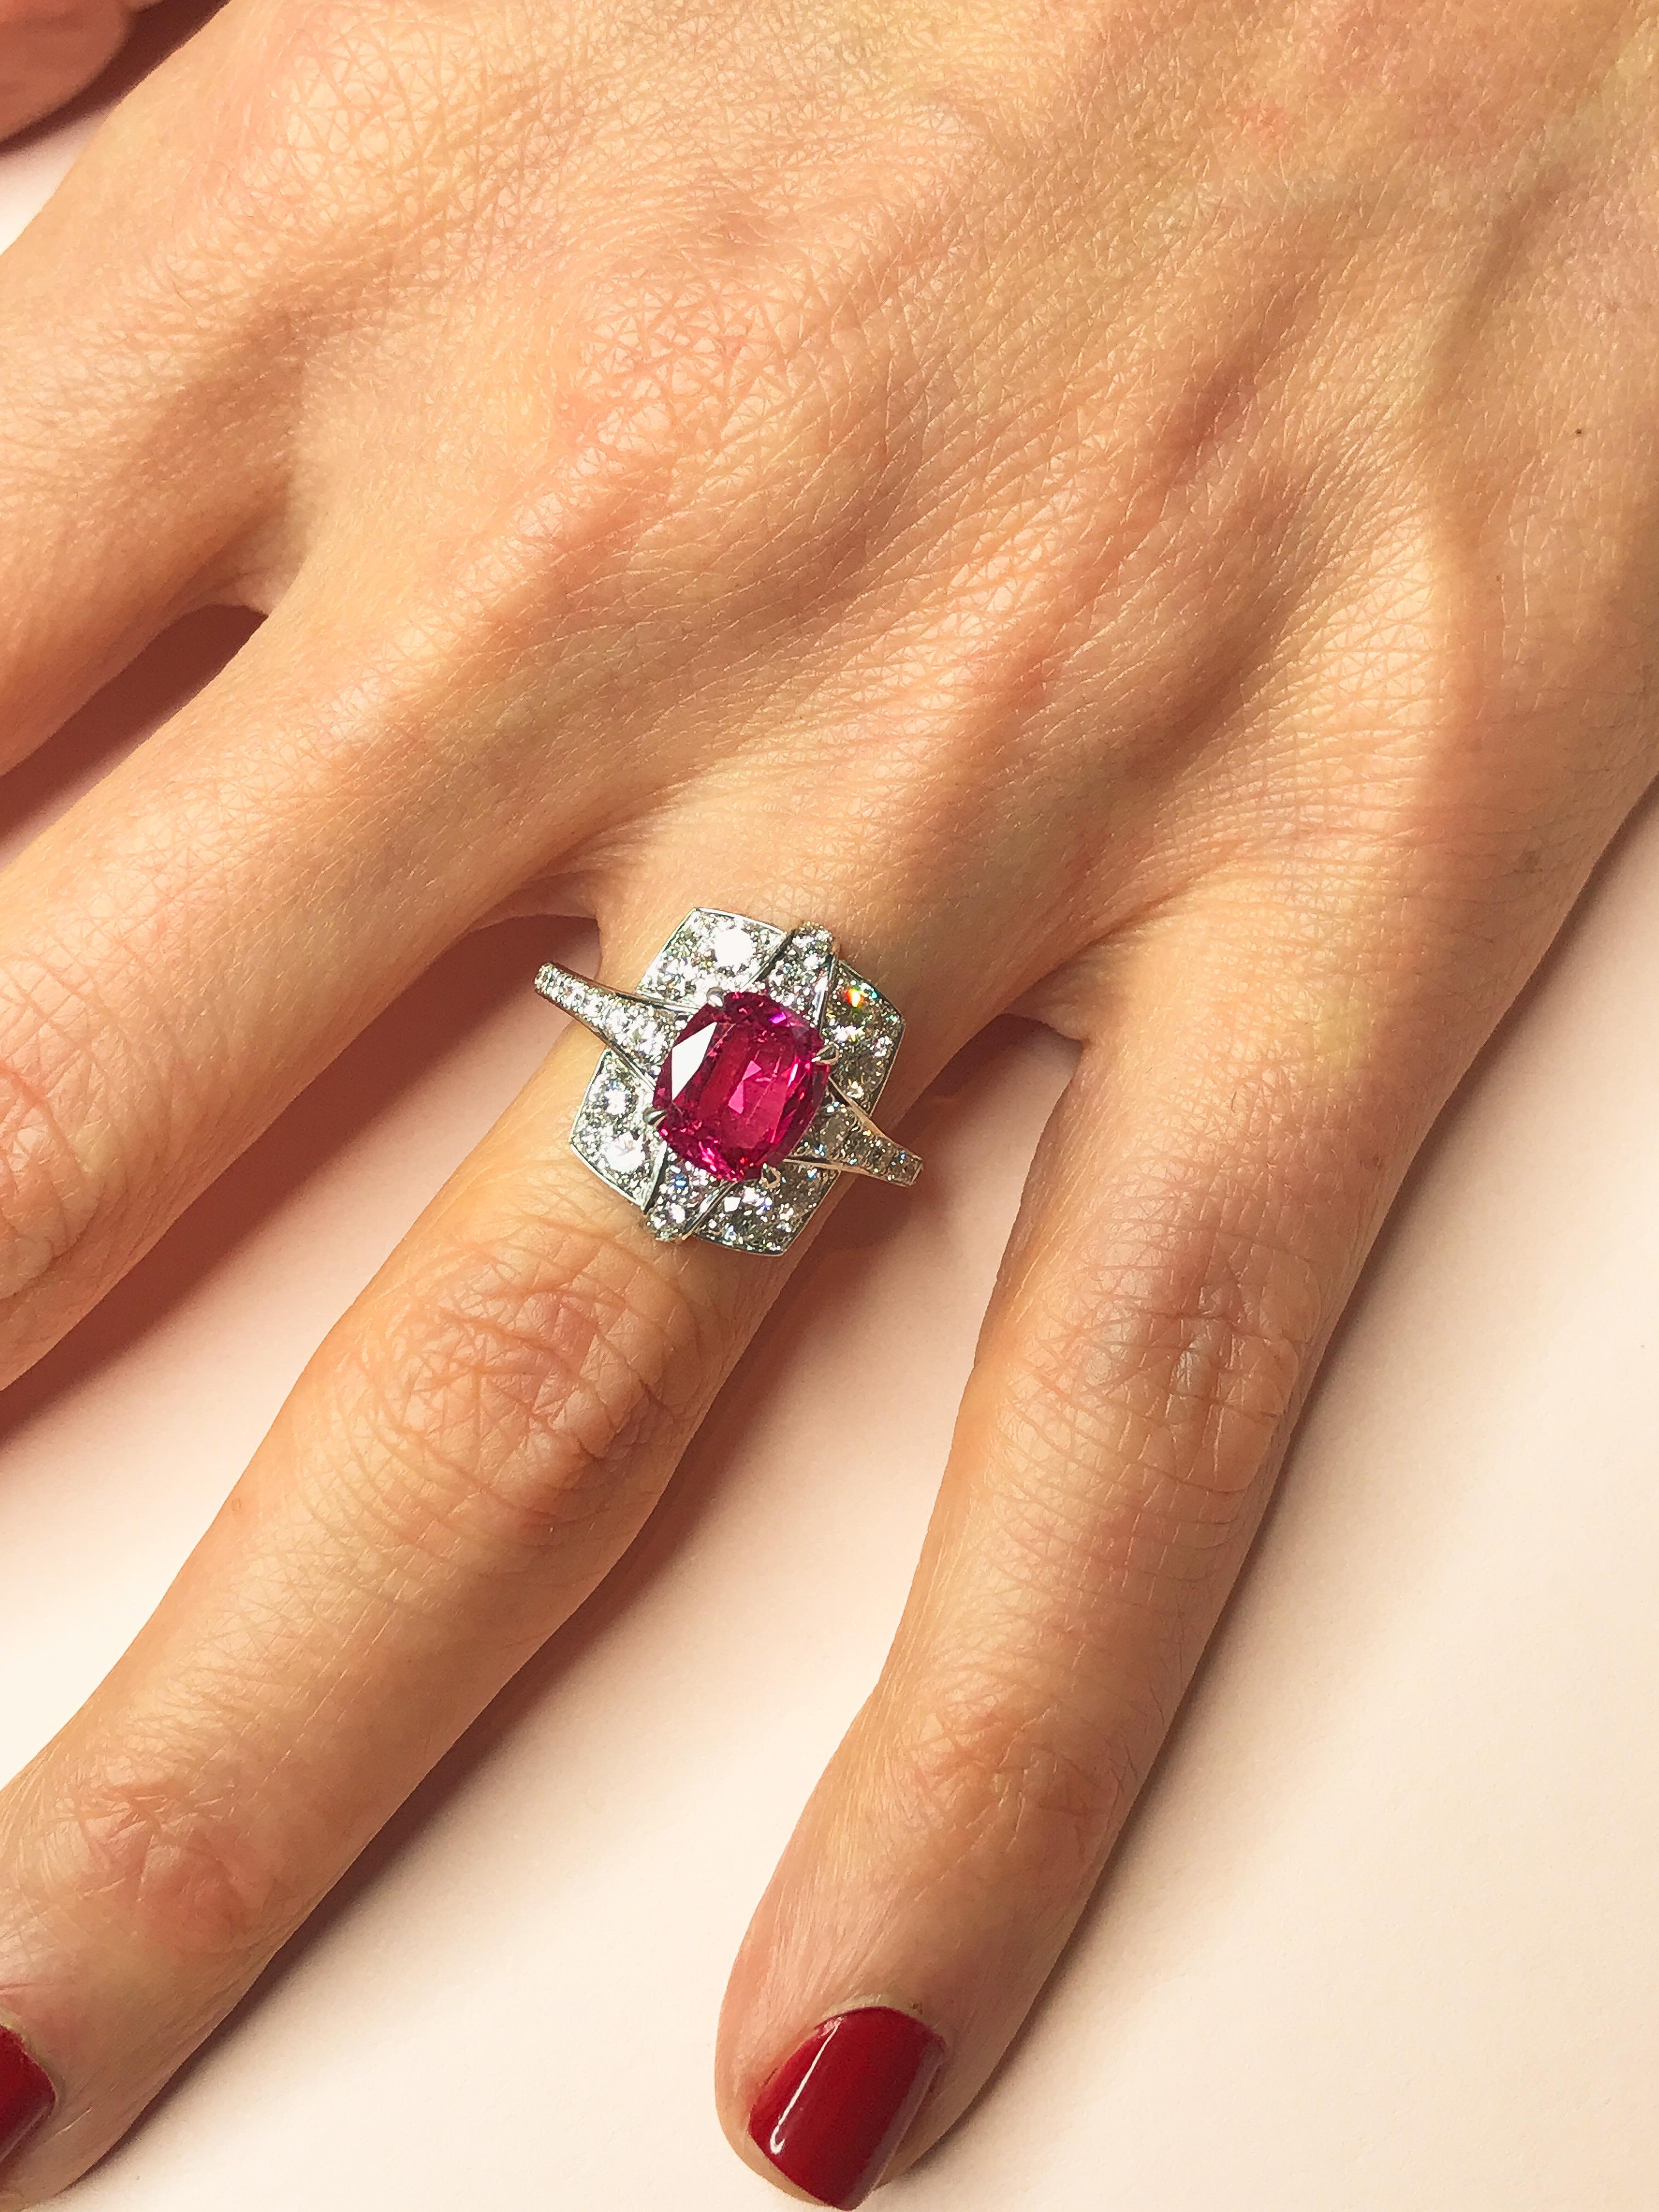 Pink spinels are certainly one of the hottest gemstones around and this stone has a fantastic hot pink colour. The ring is also truly unique, blending contemporary styling with classic design. This one of a kind cocktail ring brings together an